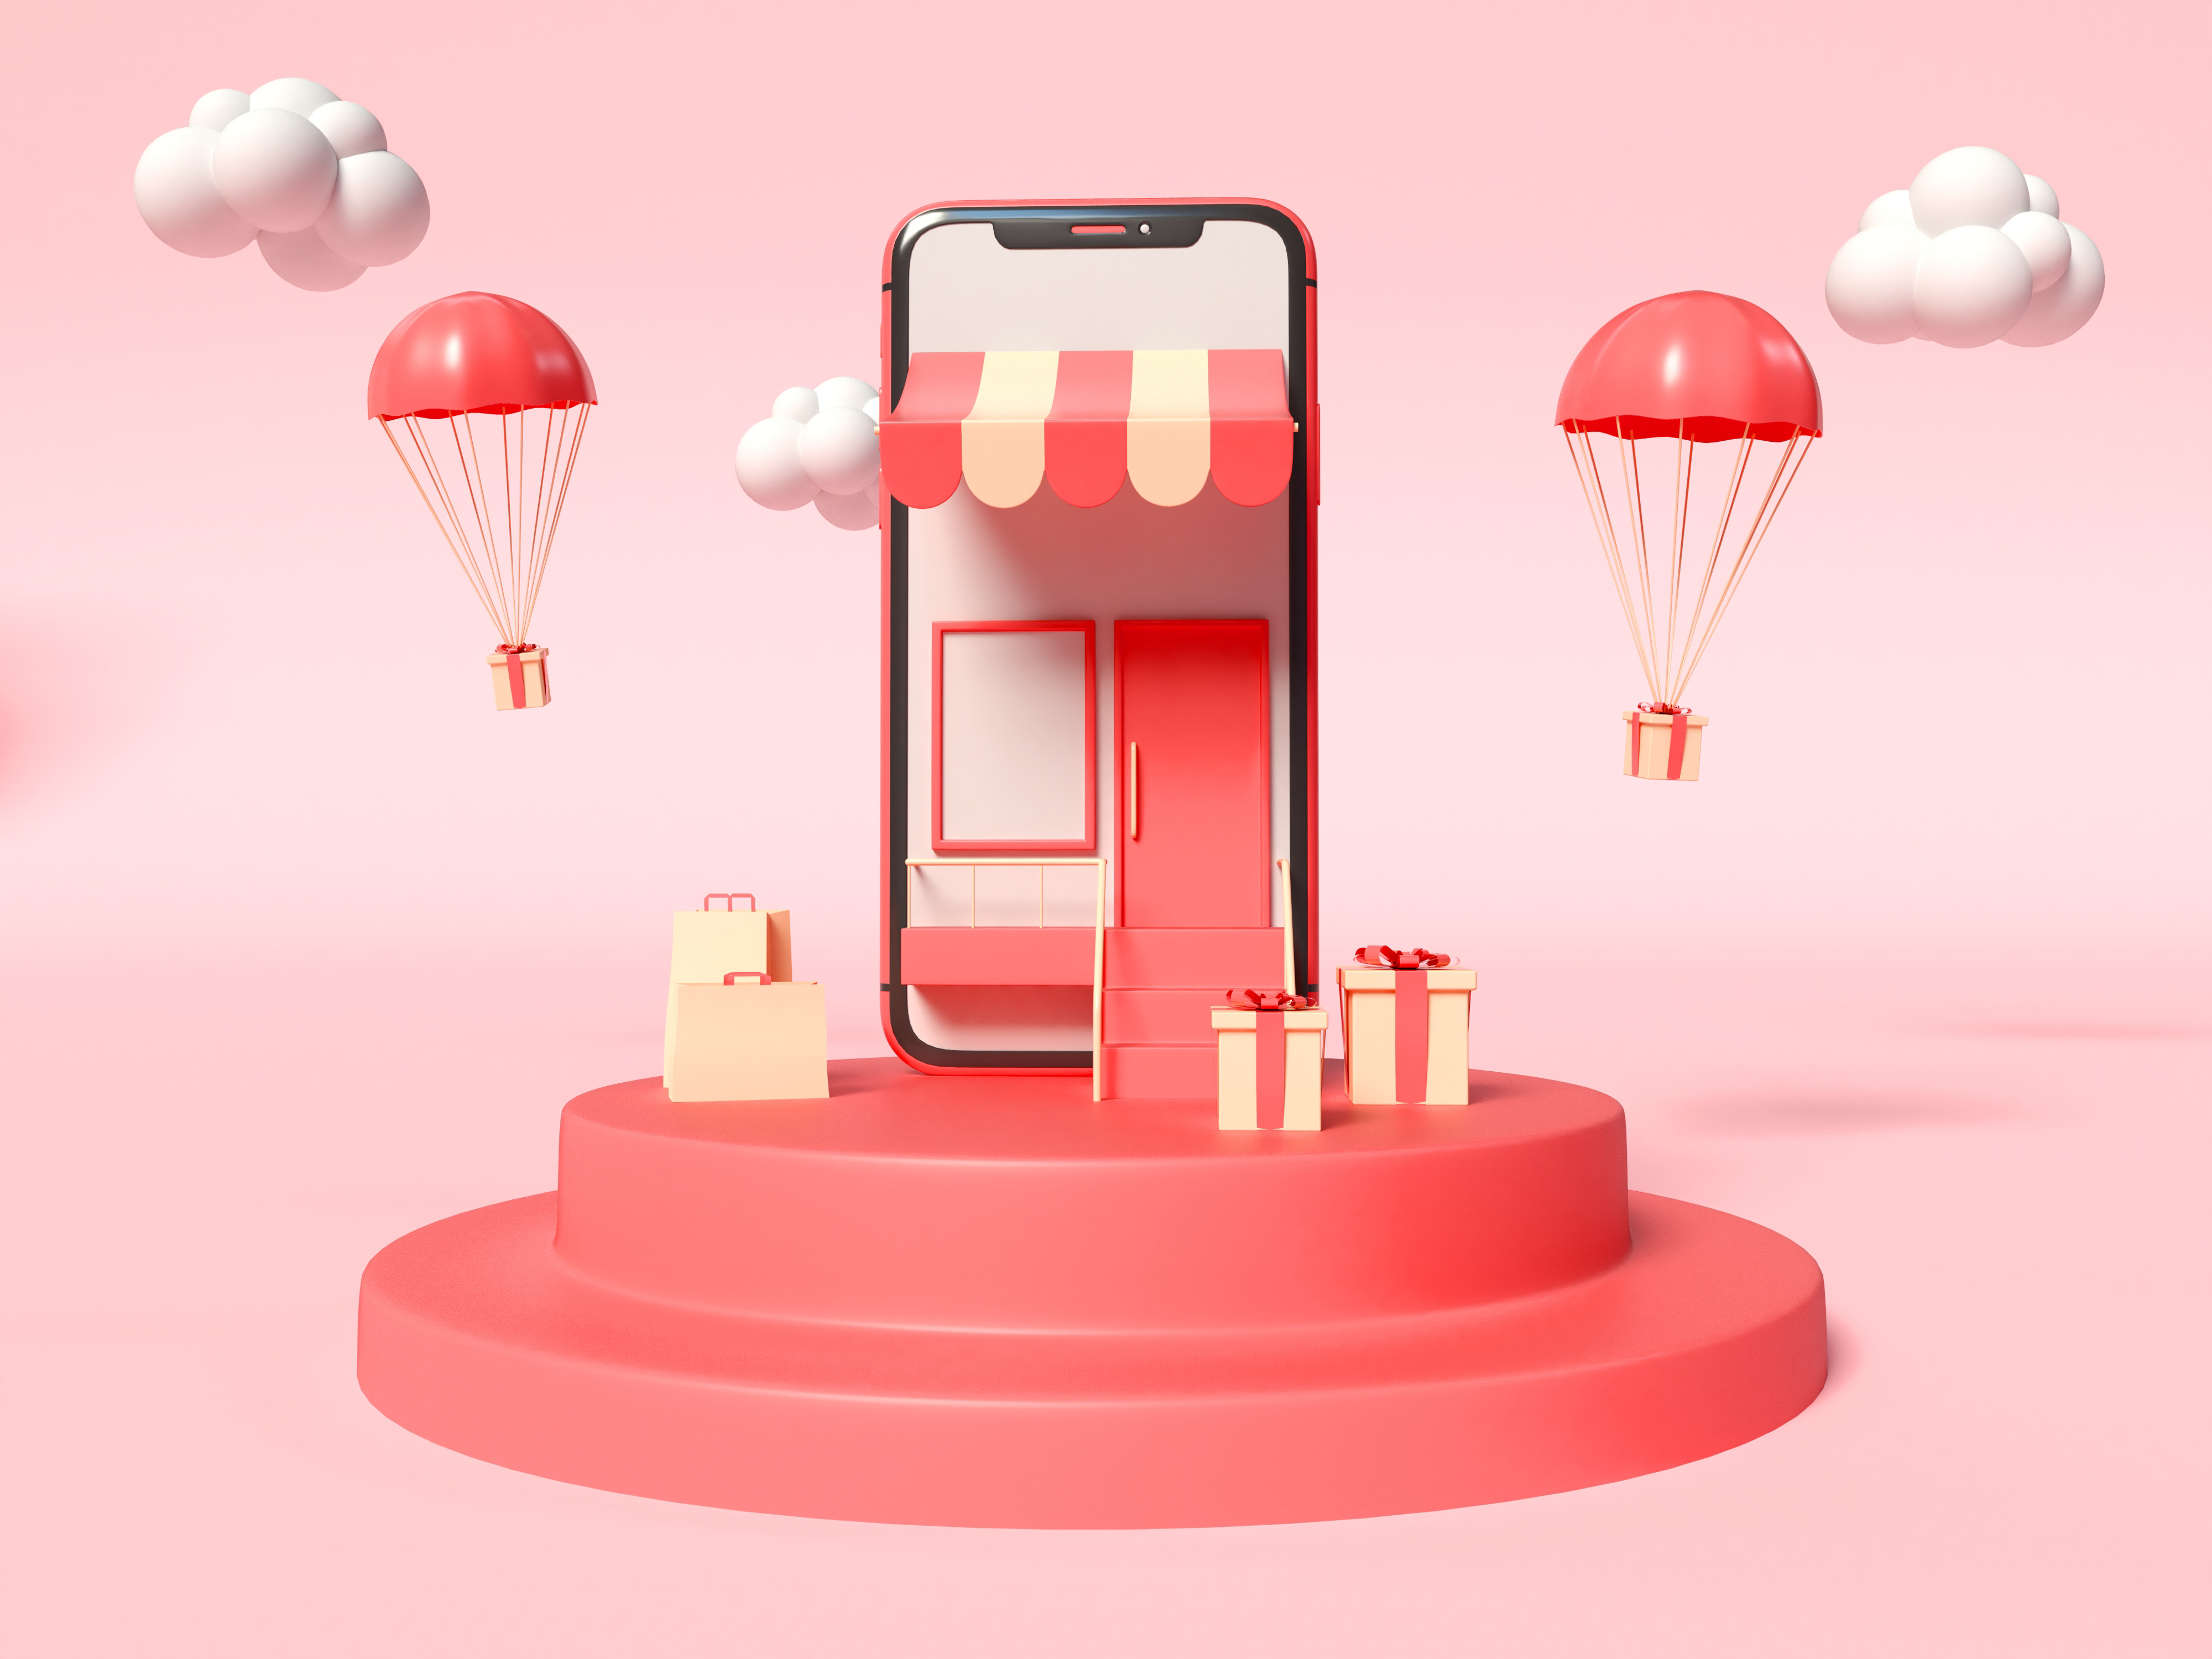 3D Illustration. Smartphone with a store on the screen and with gift boxes on a side. Online shopping concept.